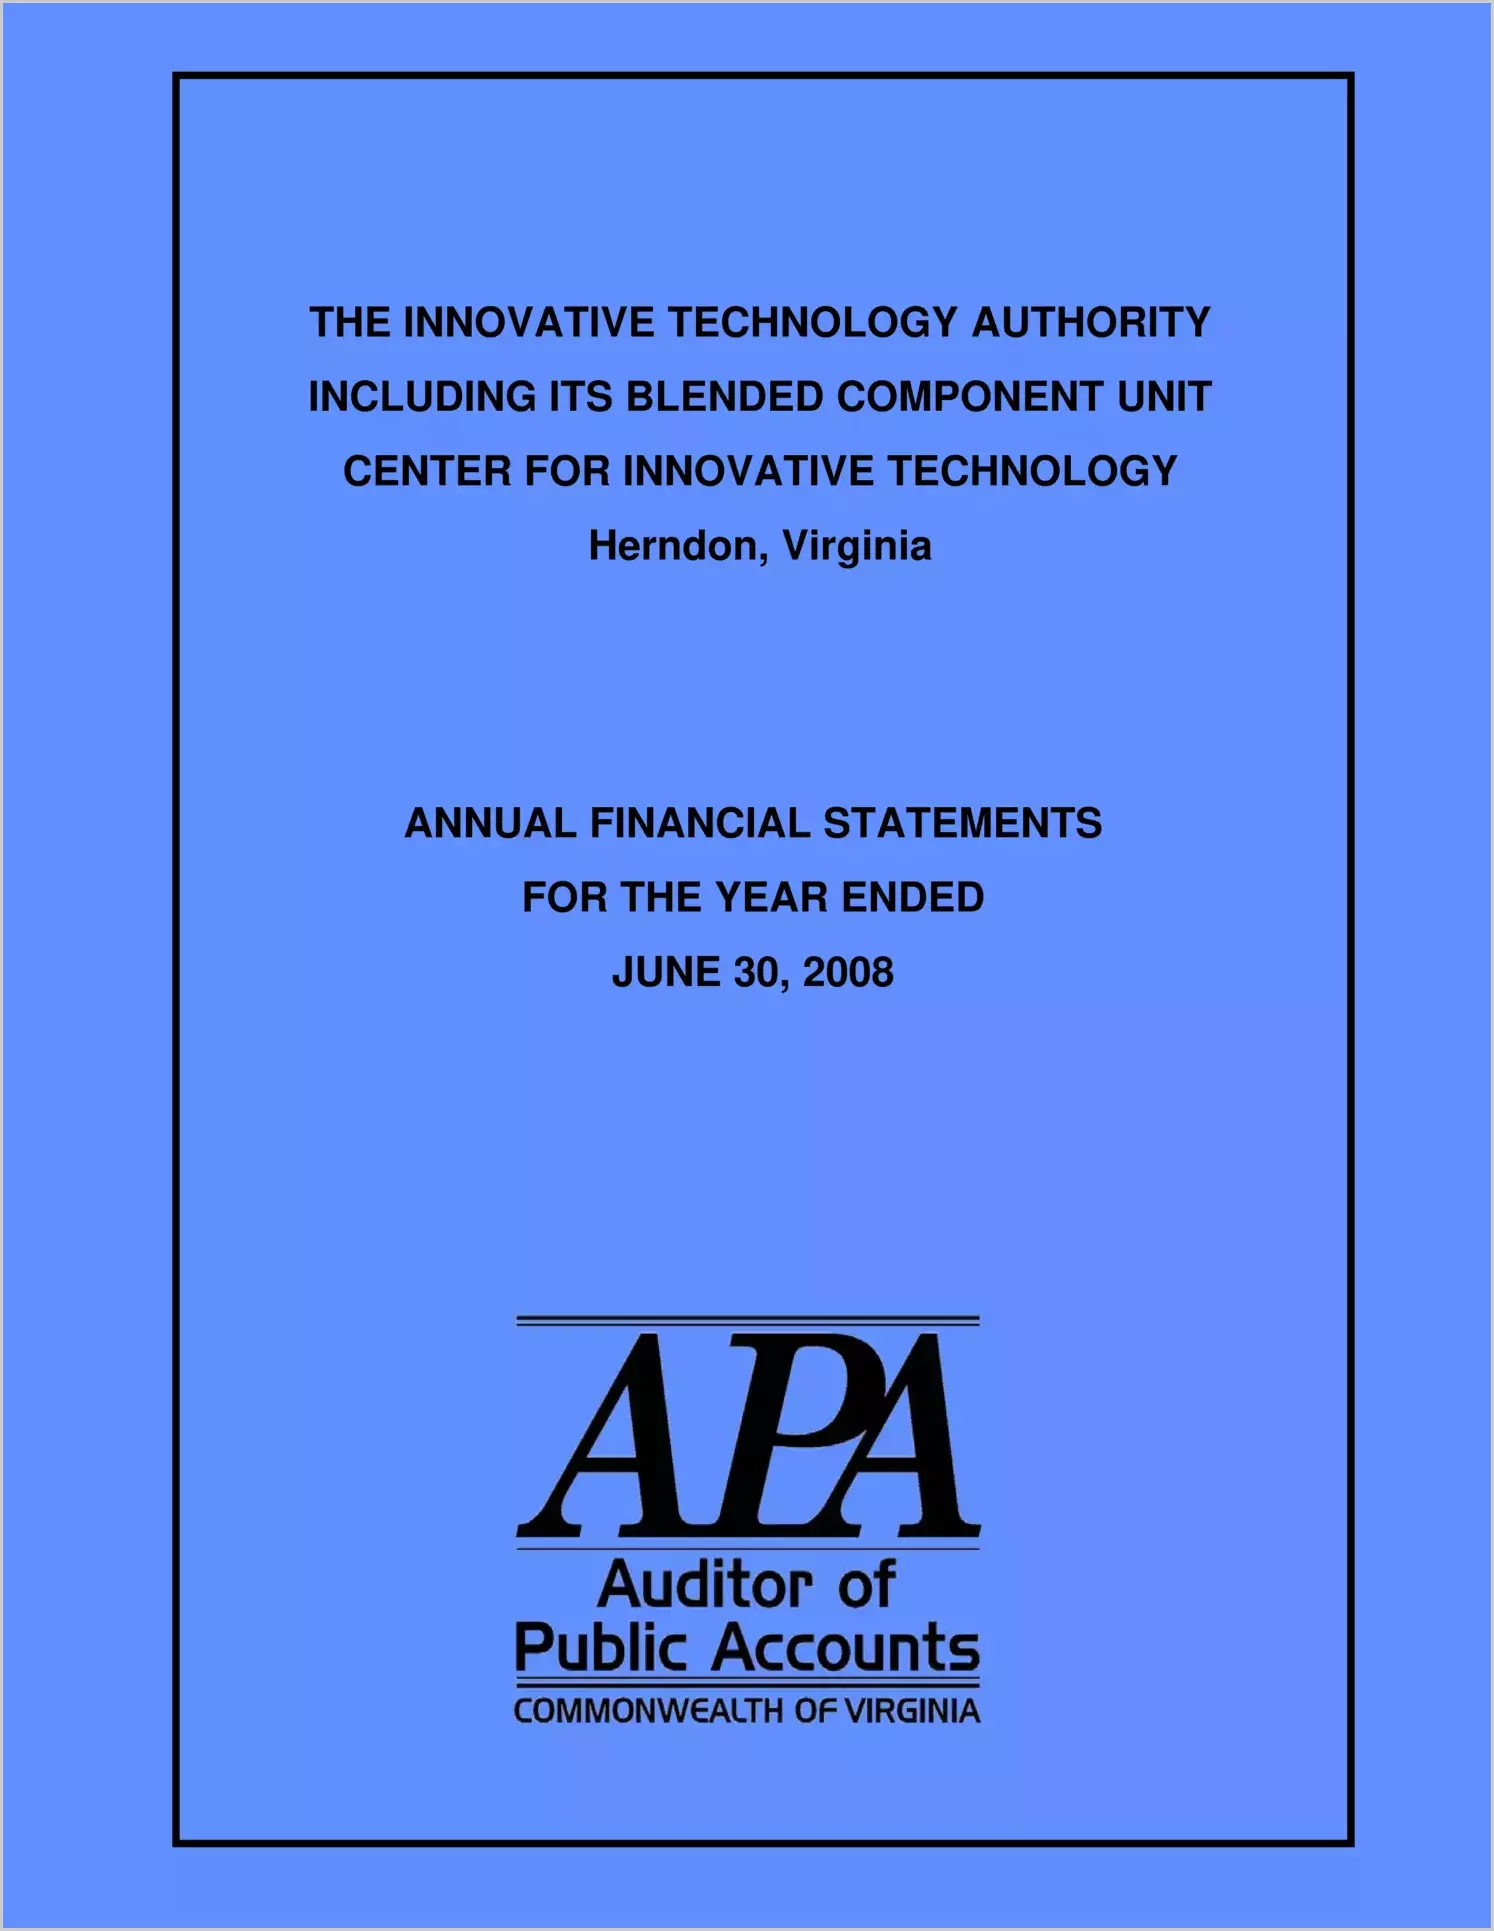 The Innovative Technology Authority Including Its Blended Component Unit Center for Innovative Technology for the year ended June 30, 2008